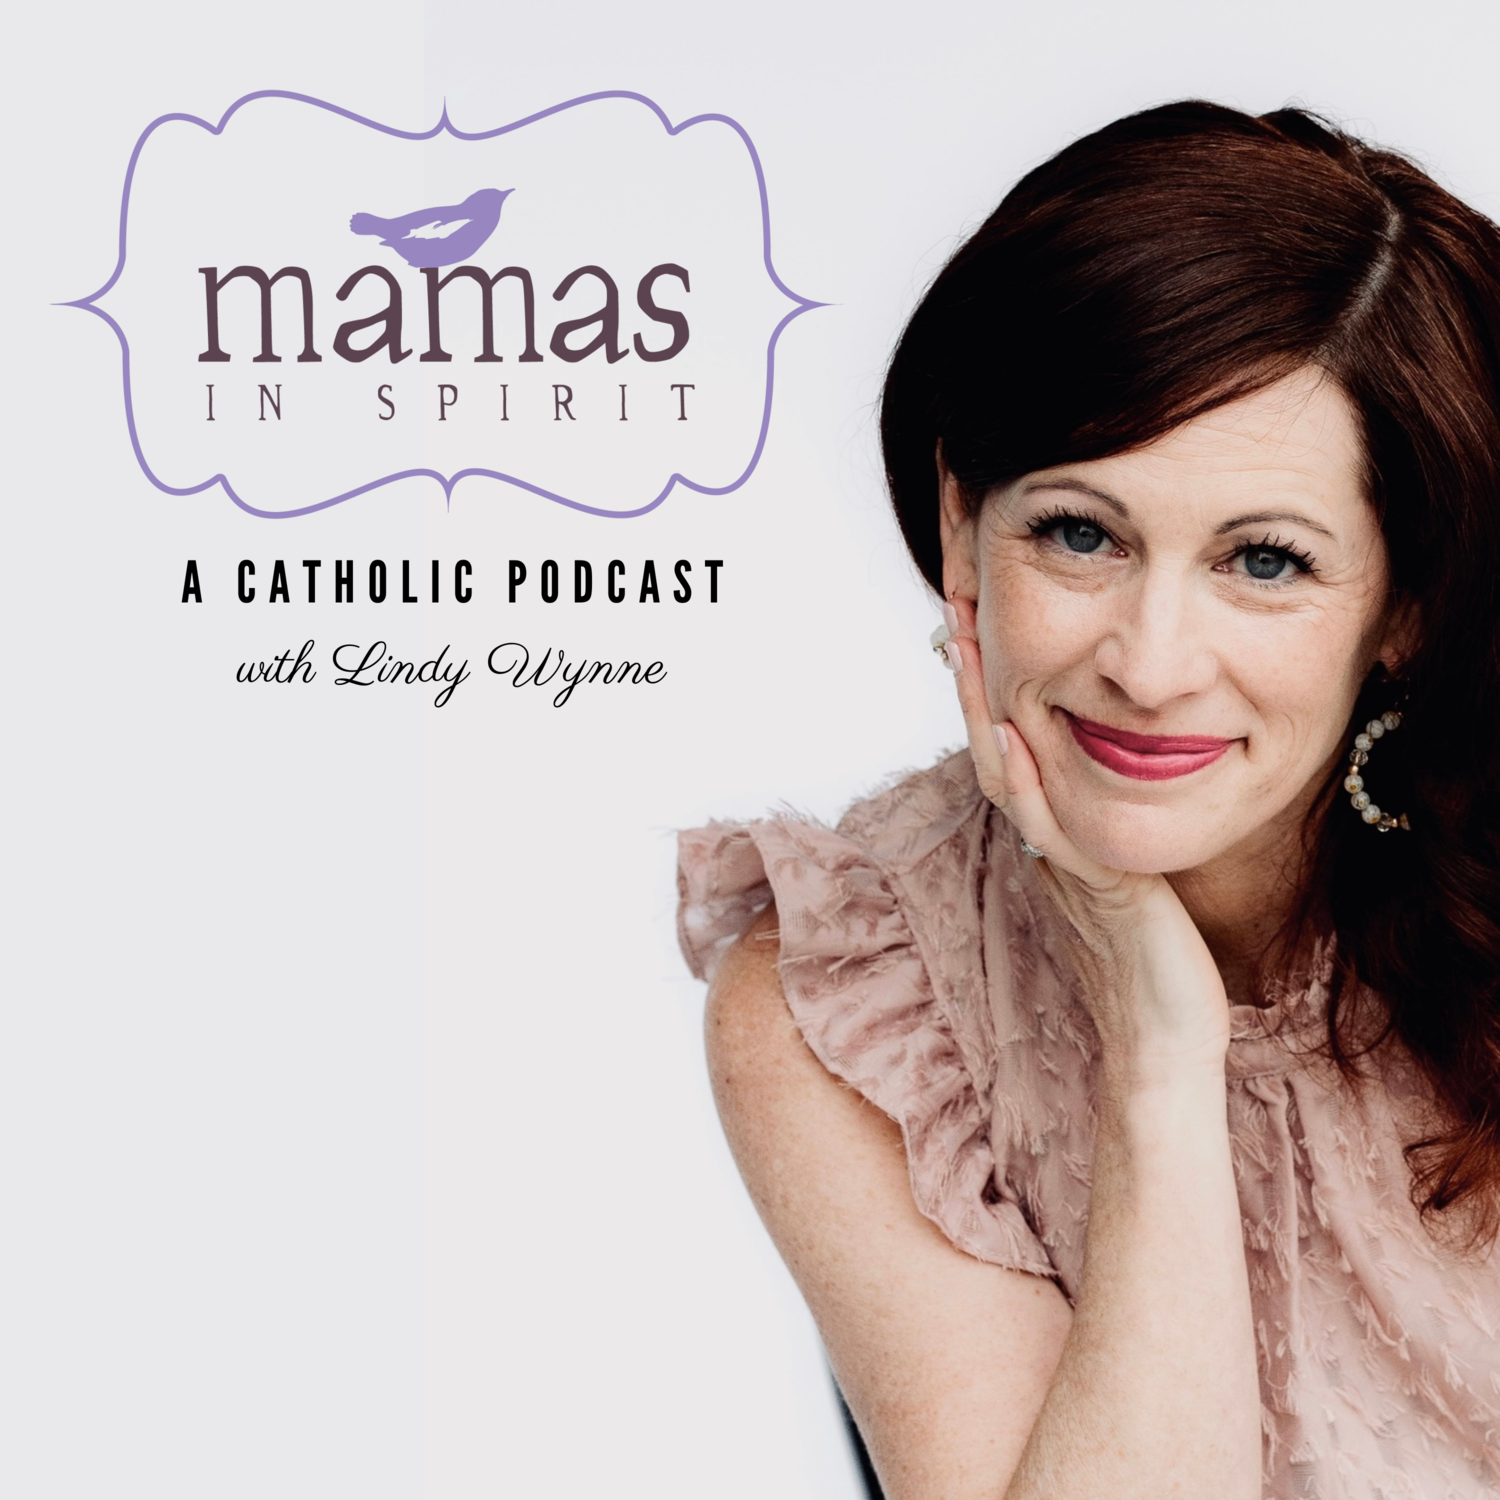 Creating the Beauty of Heaven - A Podcast Interview with Mamas in Spirit